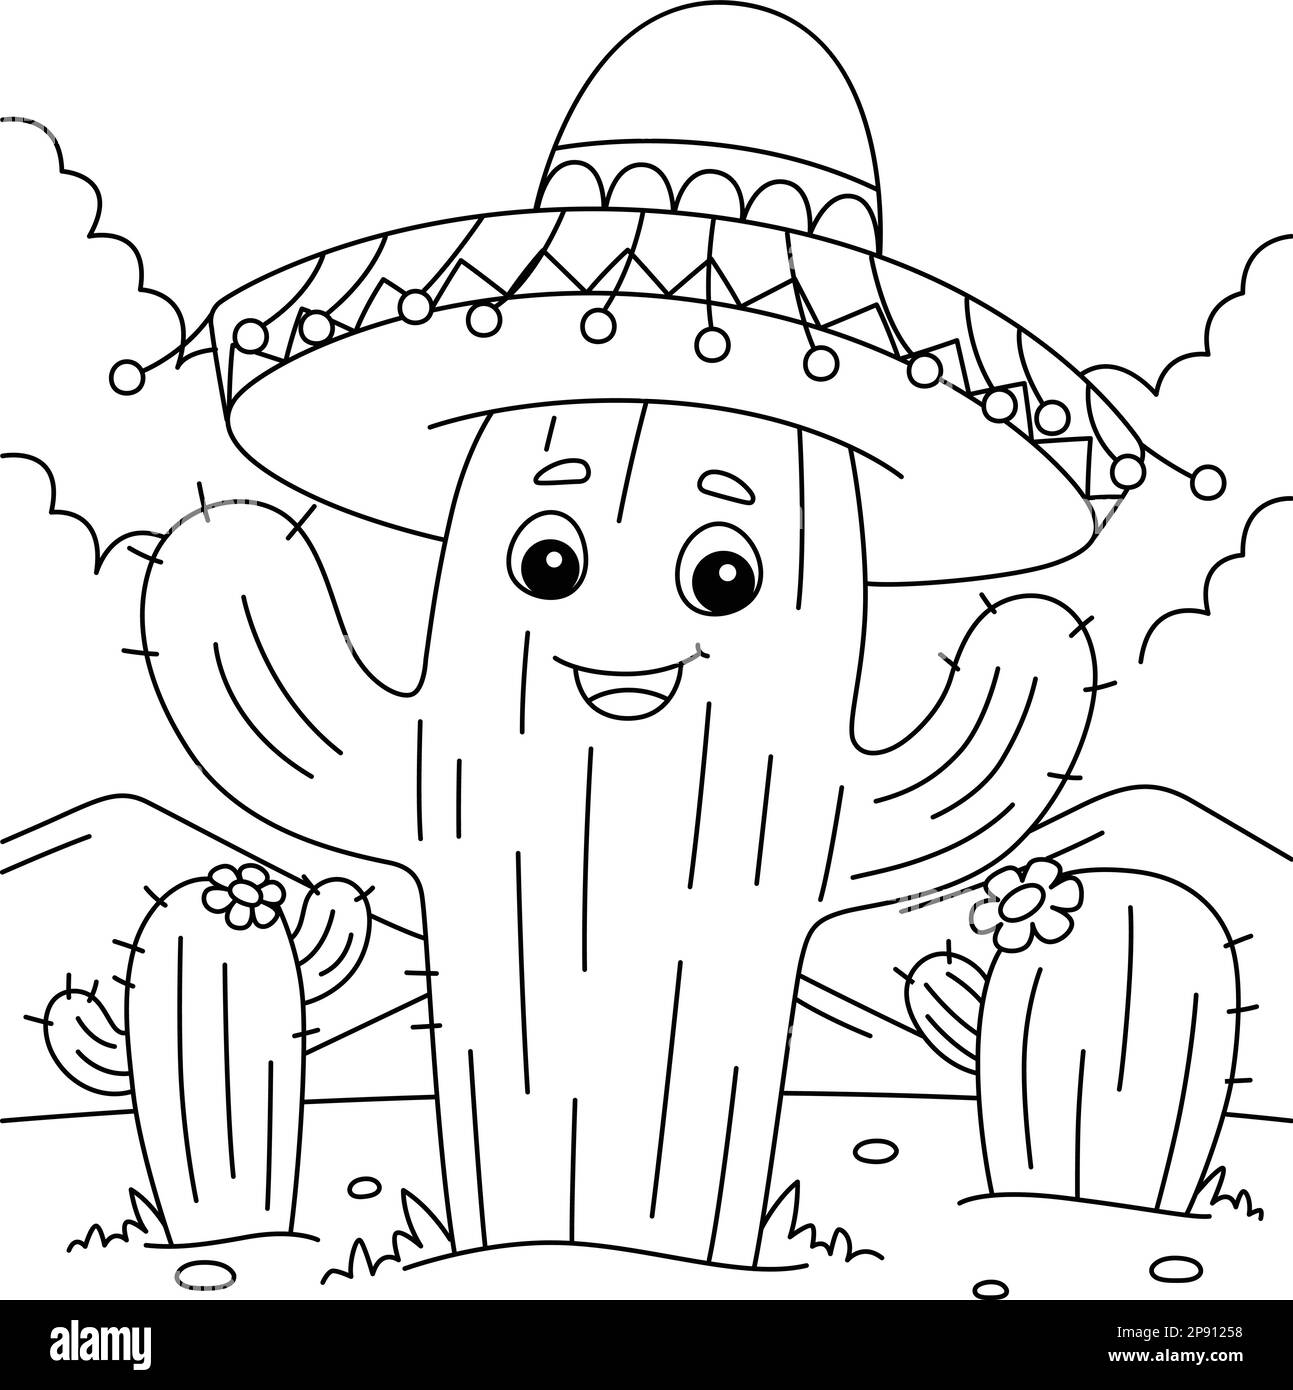 Cinco de Mayo Cactus Coloring Page for Kids Stock Vector Image & Art - Alamy